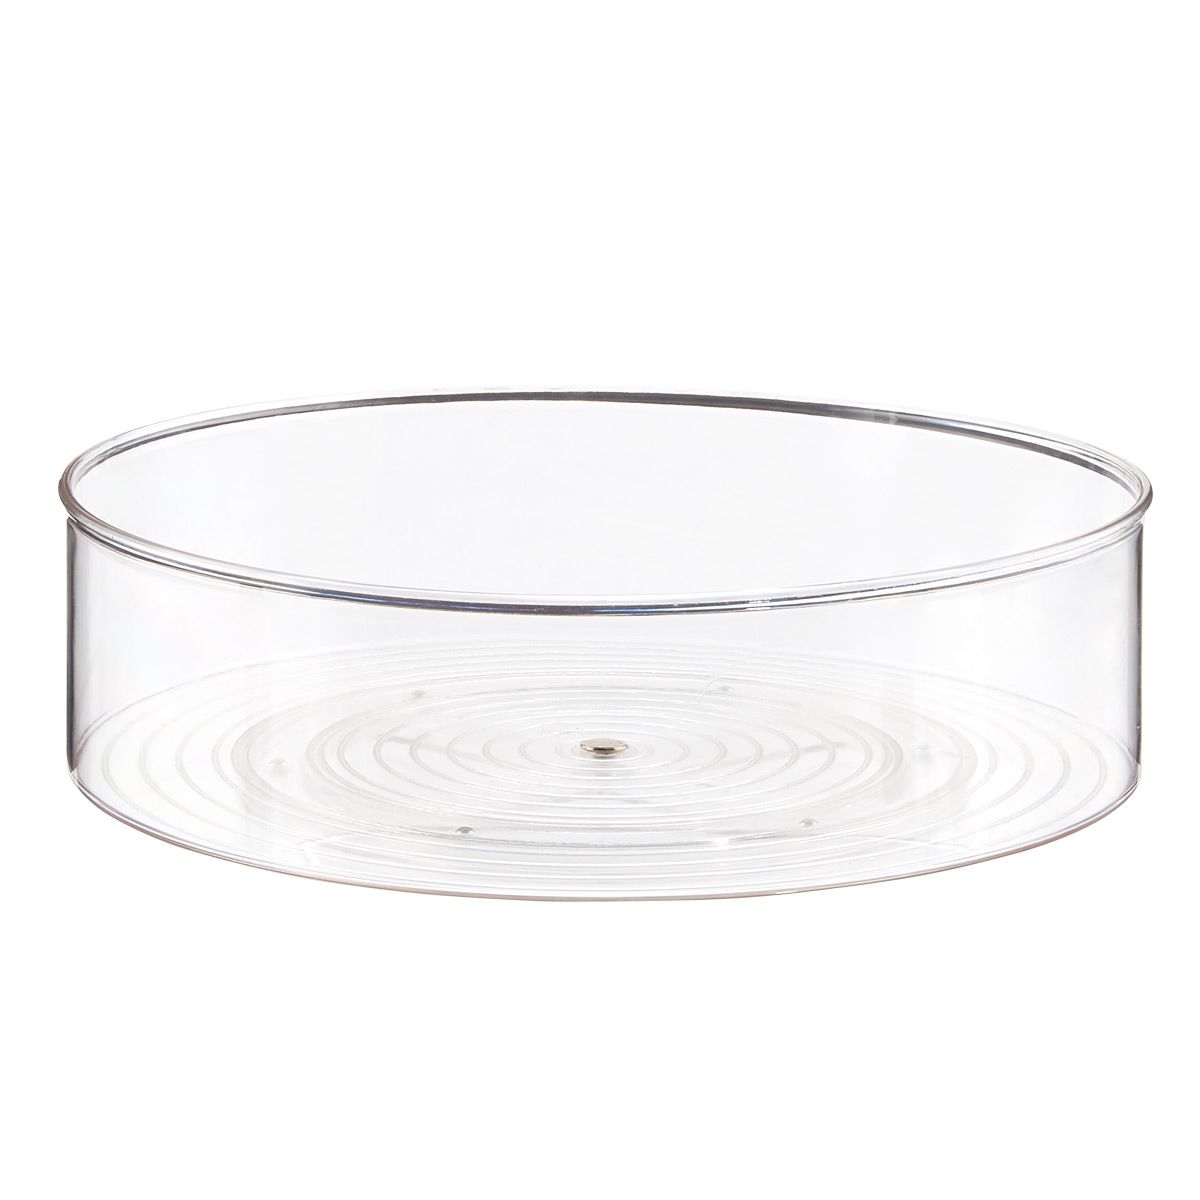 iDESIGN Linus Large Deep Turntable Clear | The Container Store